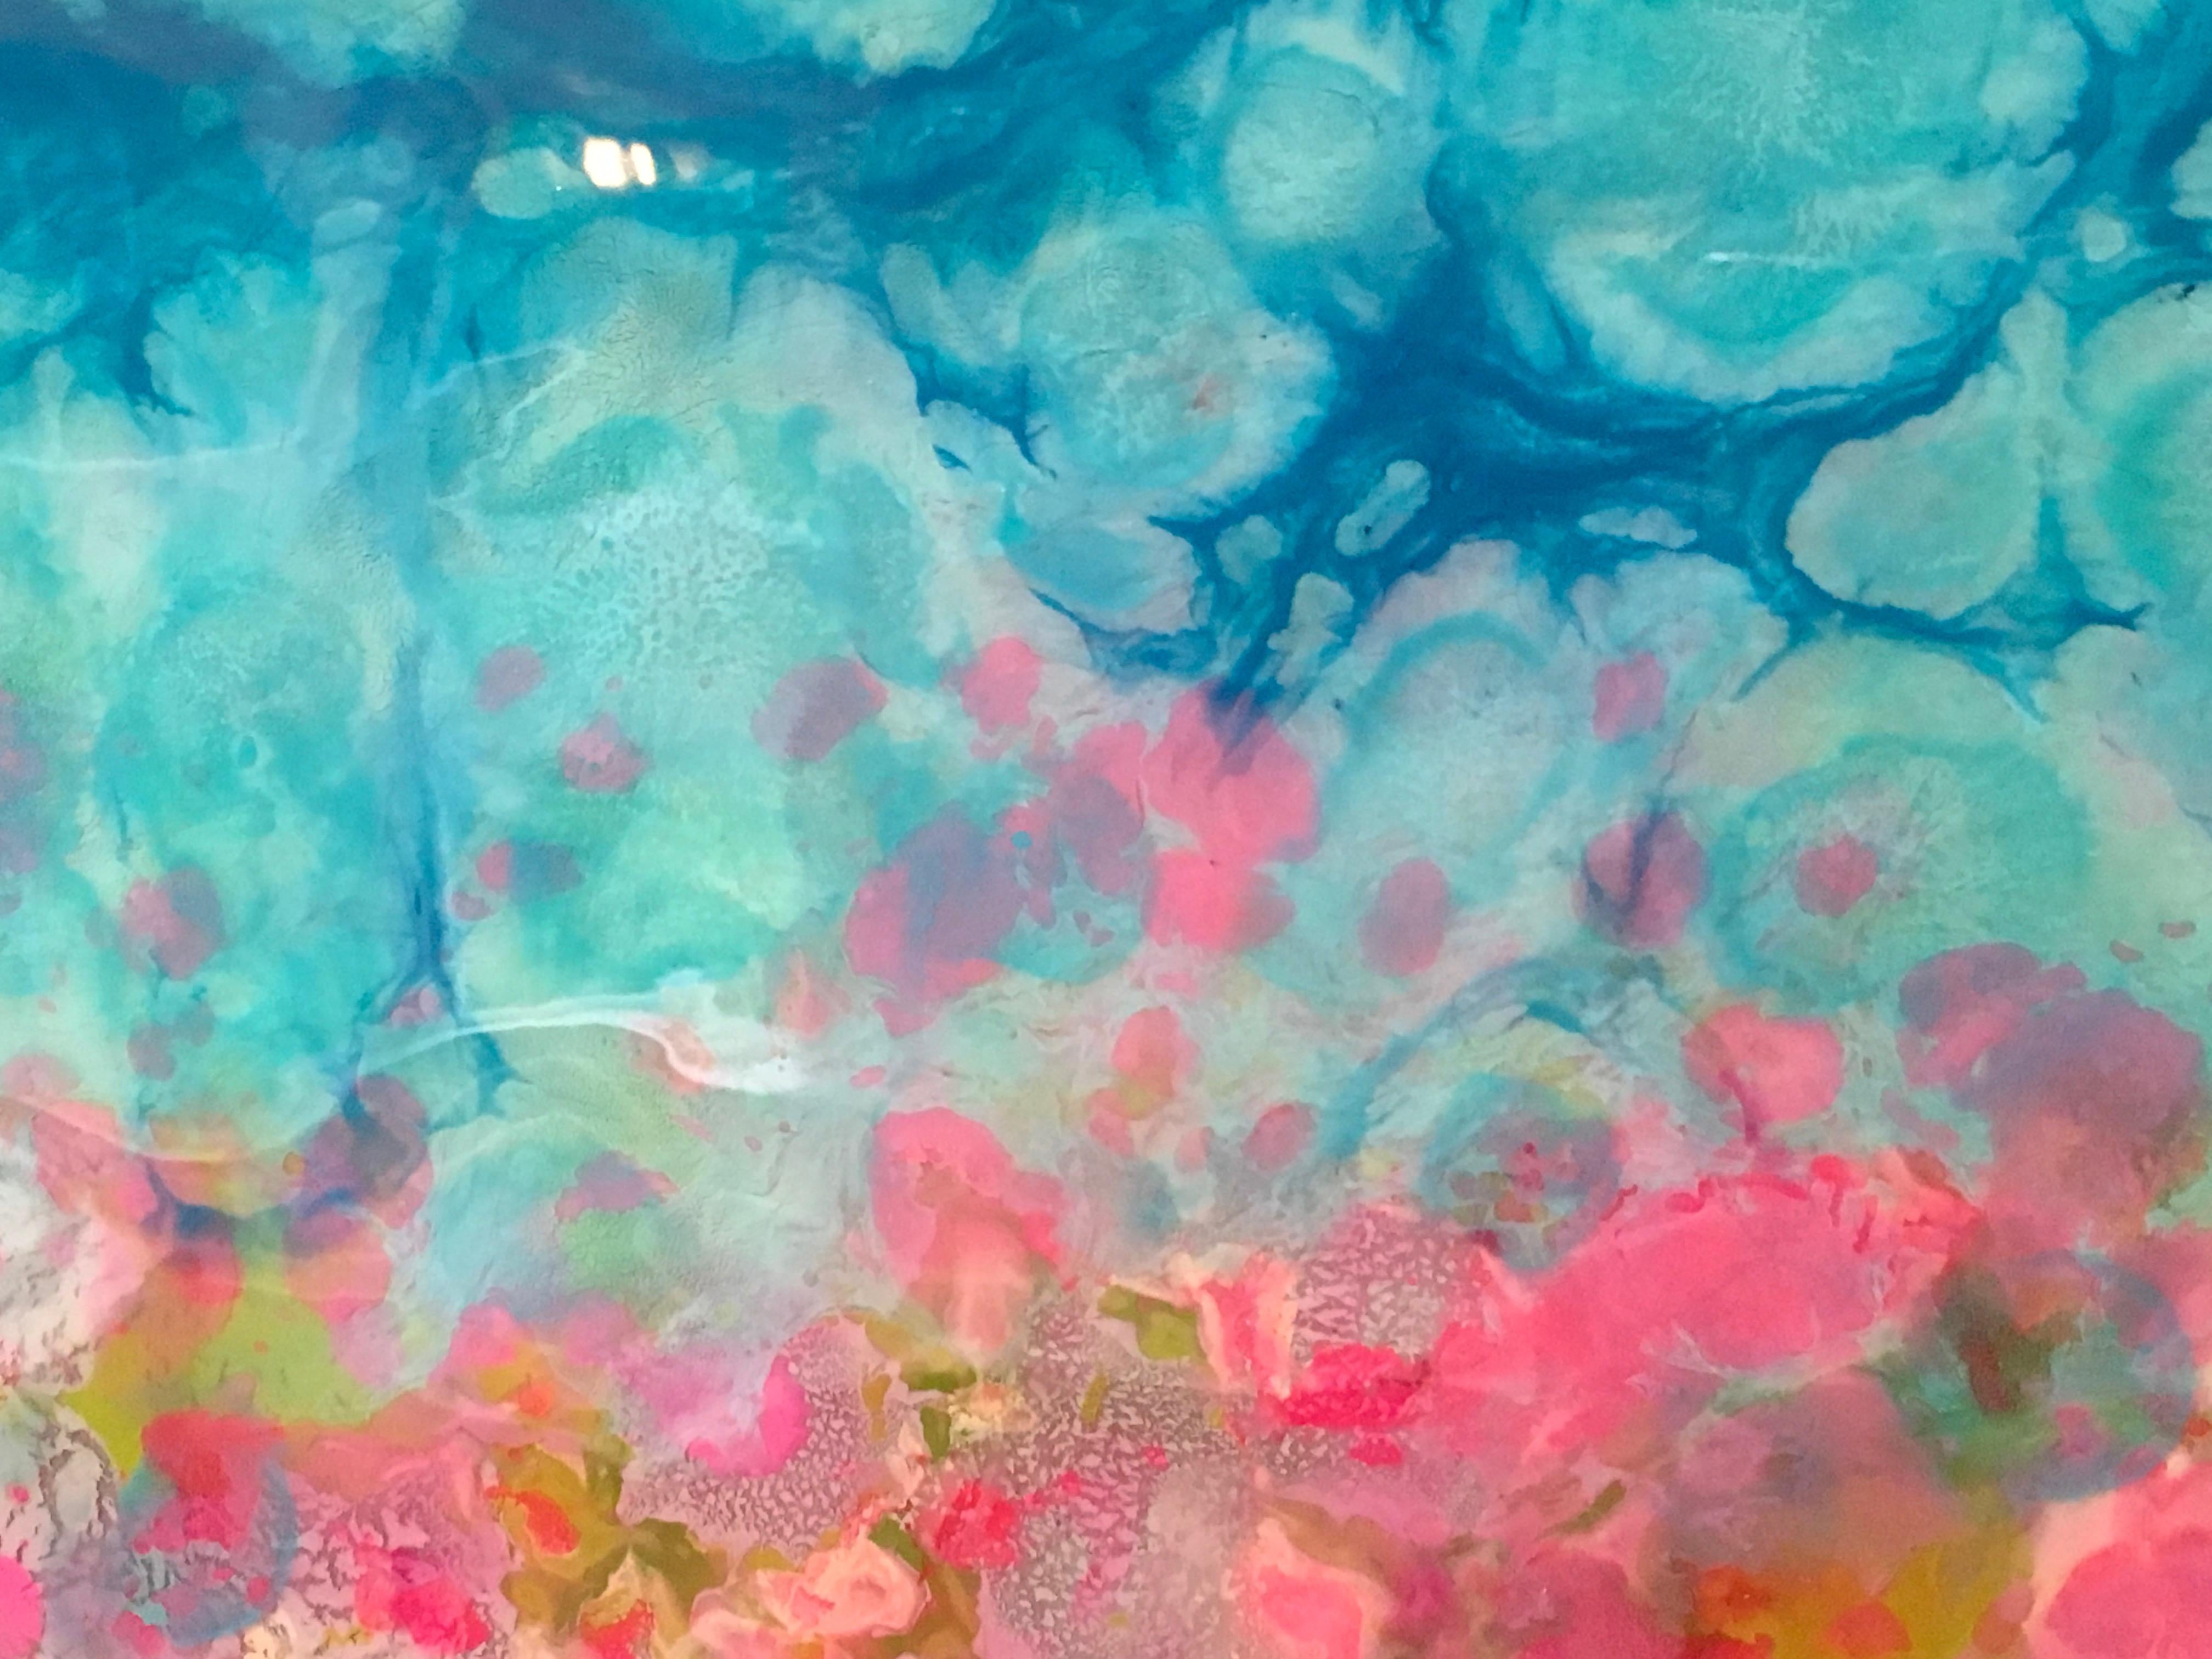 Hyangjia, Colorful Abstract Landscape, Blue, Pink, Green, hi-gloss finish, 30x60 - Contemporary Painting by Marie Danielle Leblanc